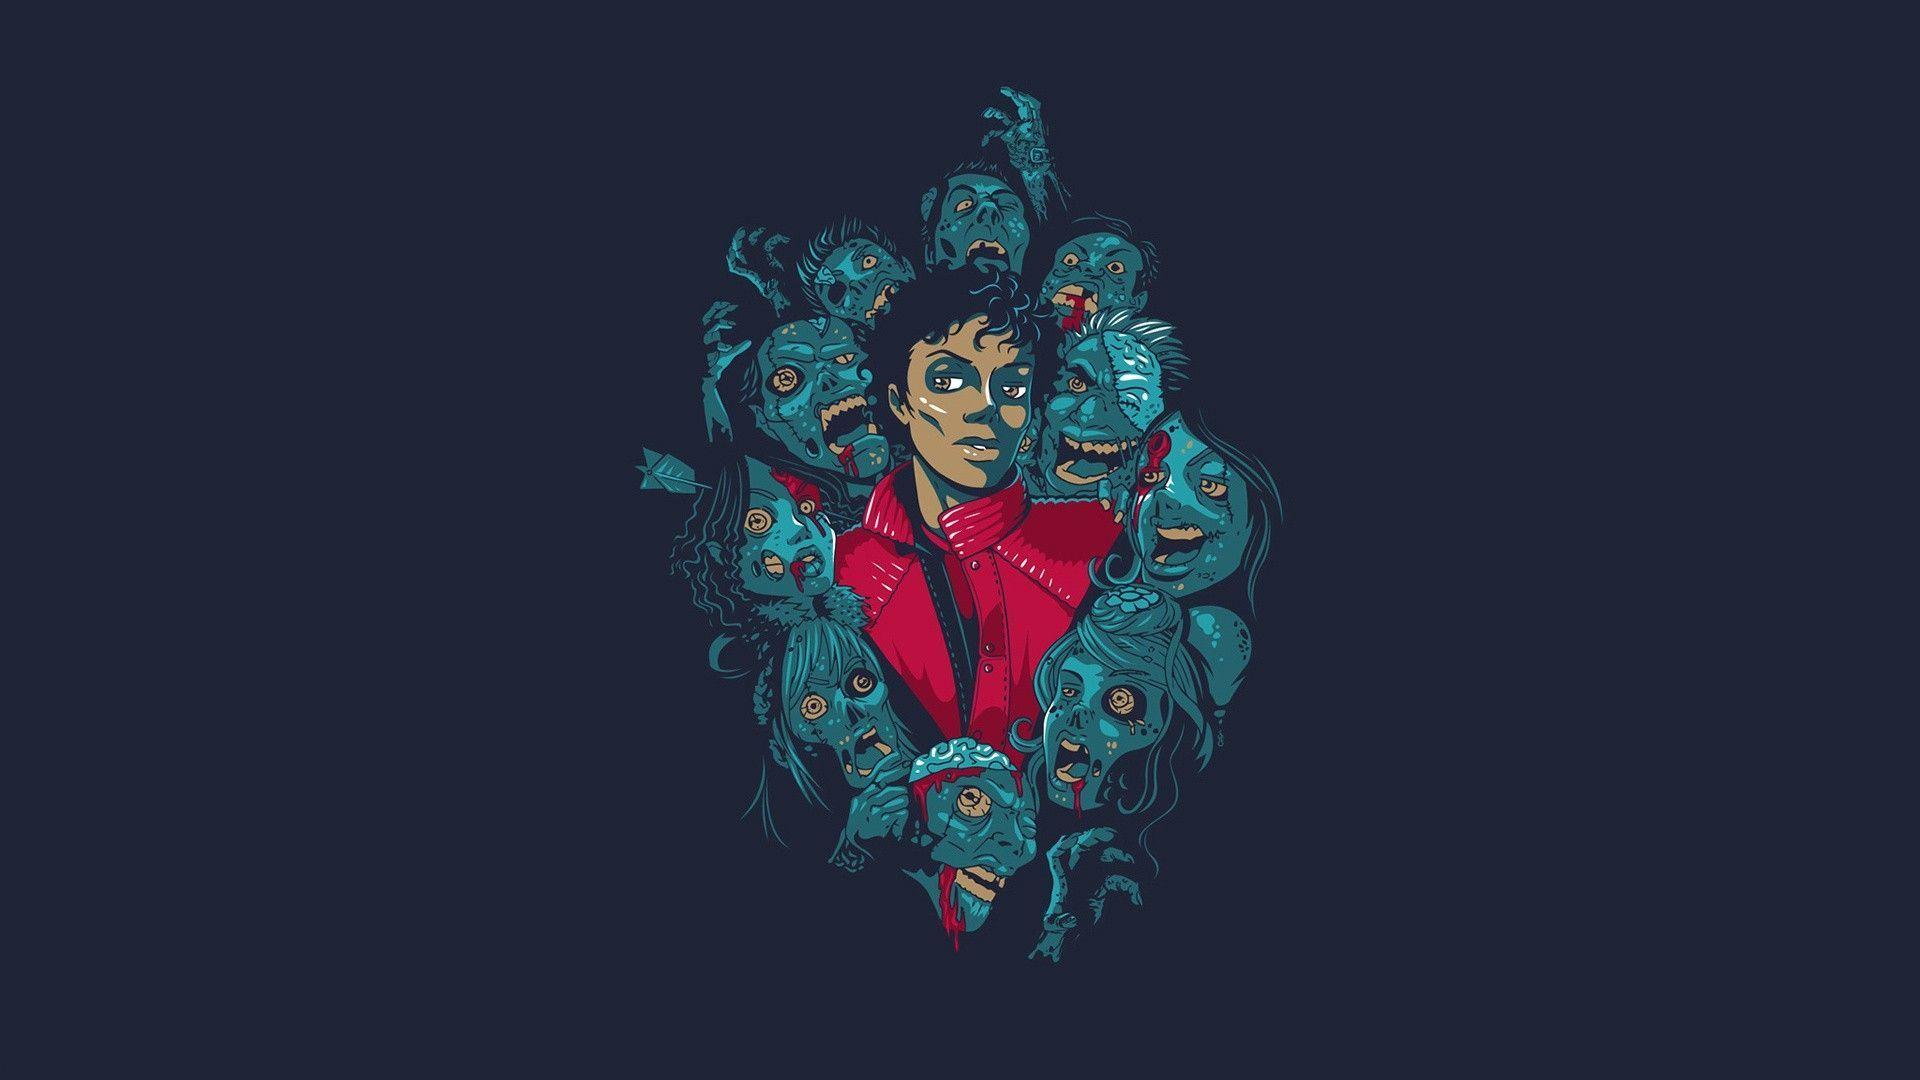 Michael Jackson Thriller Zombie Hd 1080P 12 HD Wallpapers.